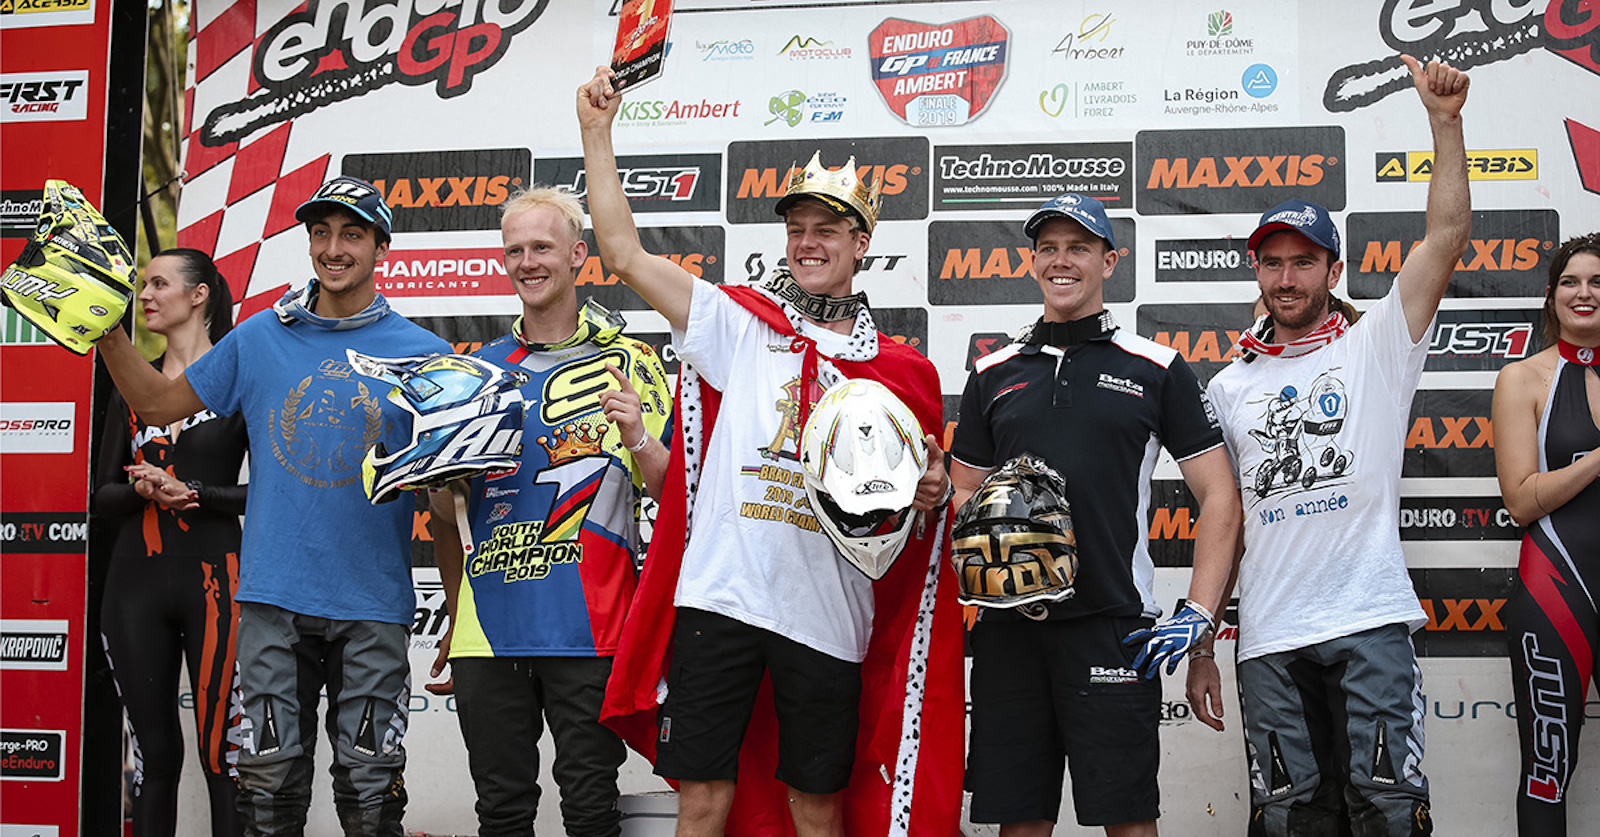 2019 Enduro World Championship final standings for all classes 